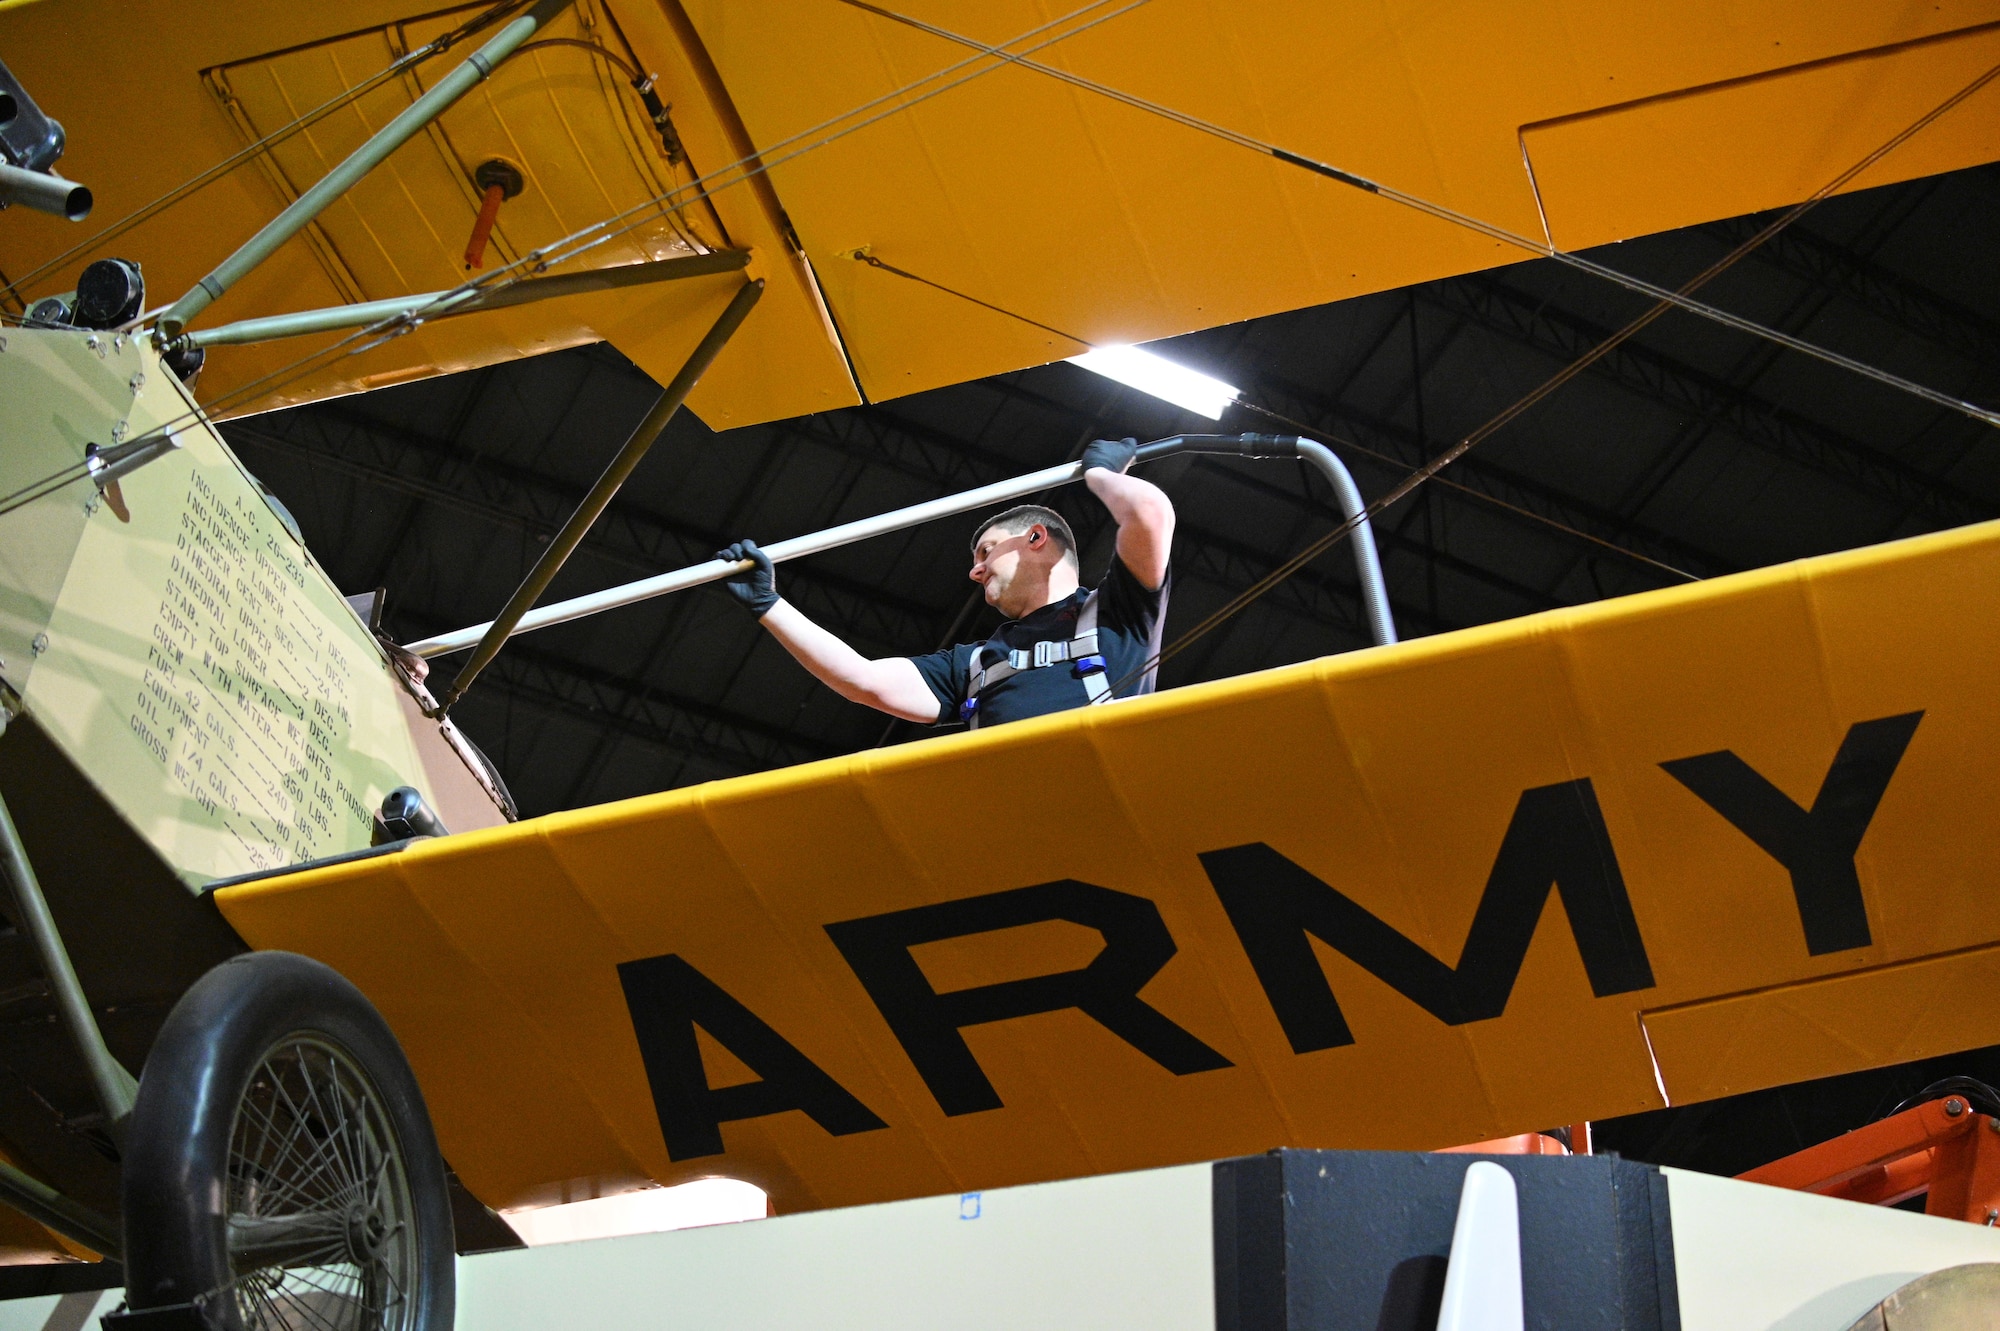 Nick Almeter cleans the Consolidated PT-1 Trusty aircraft.